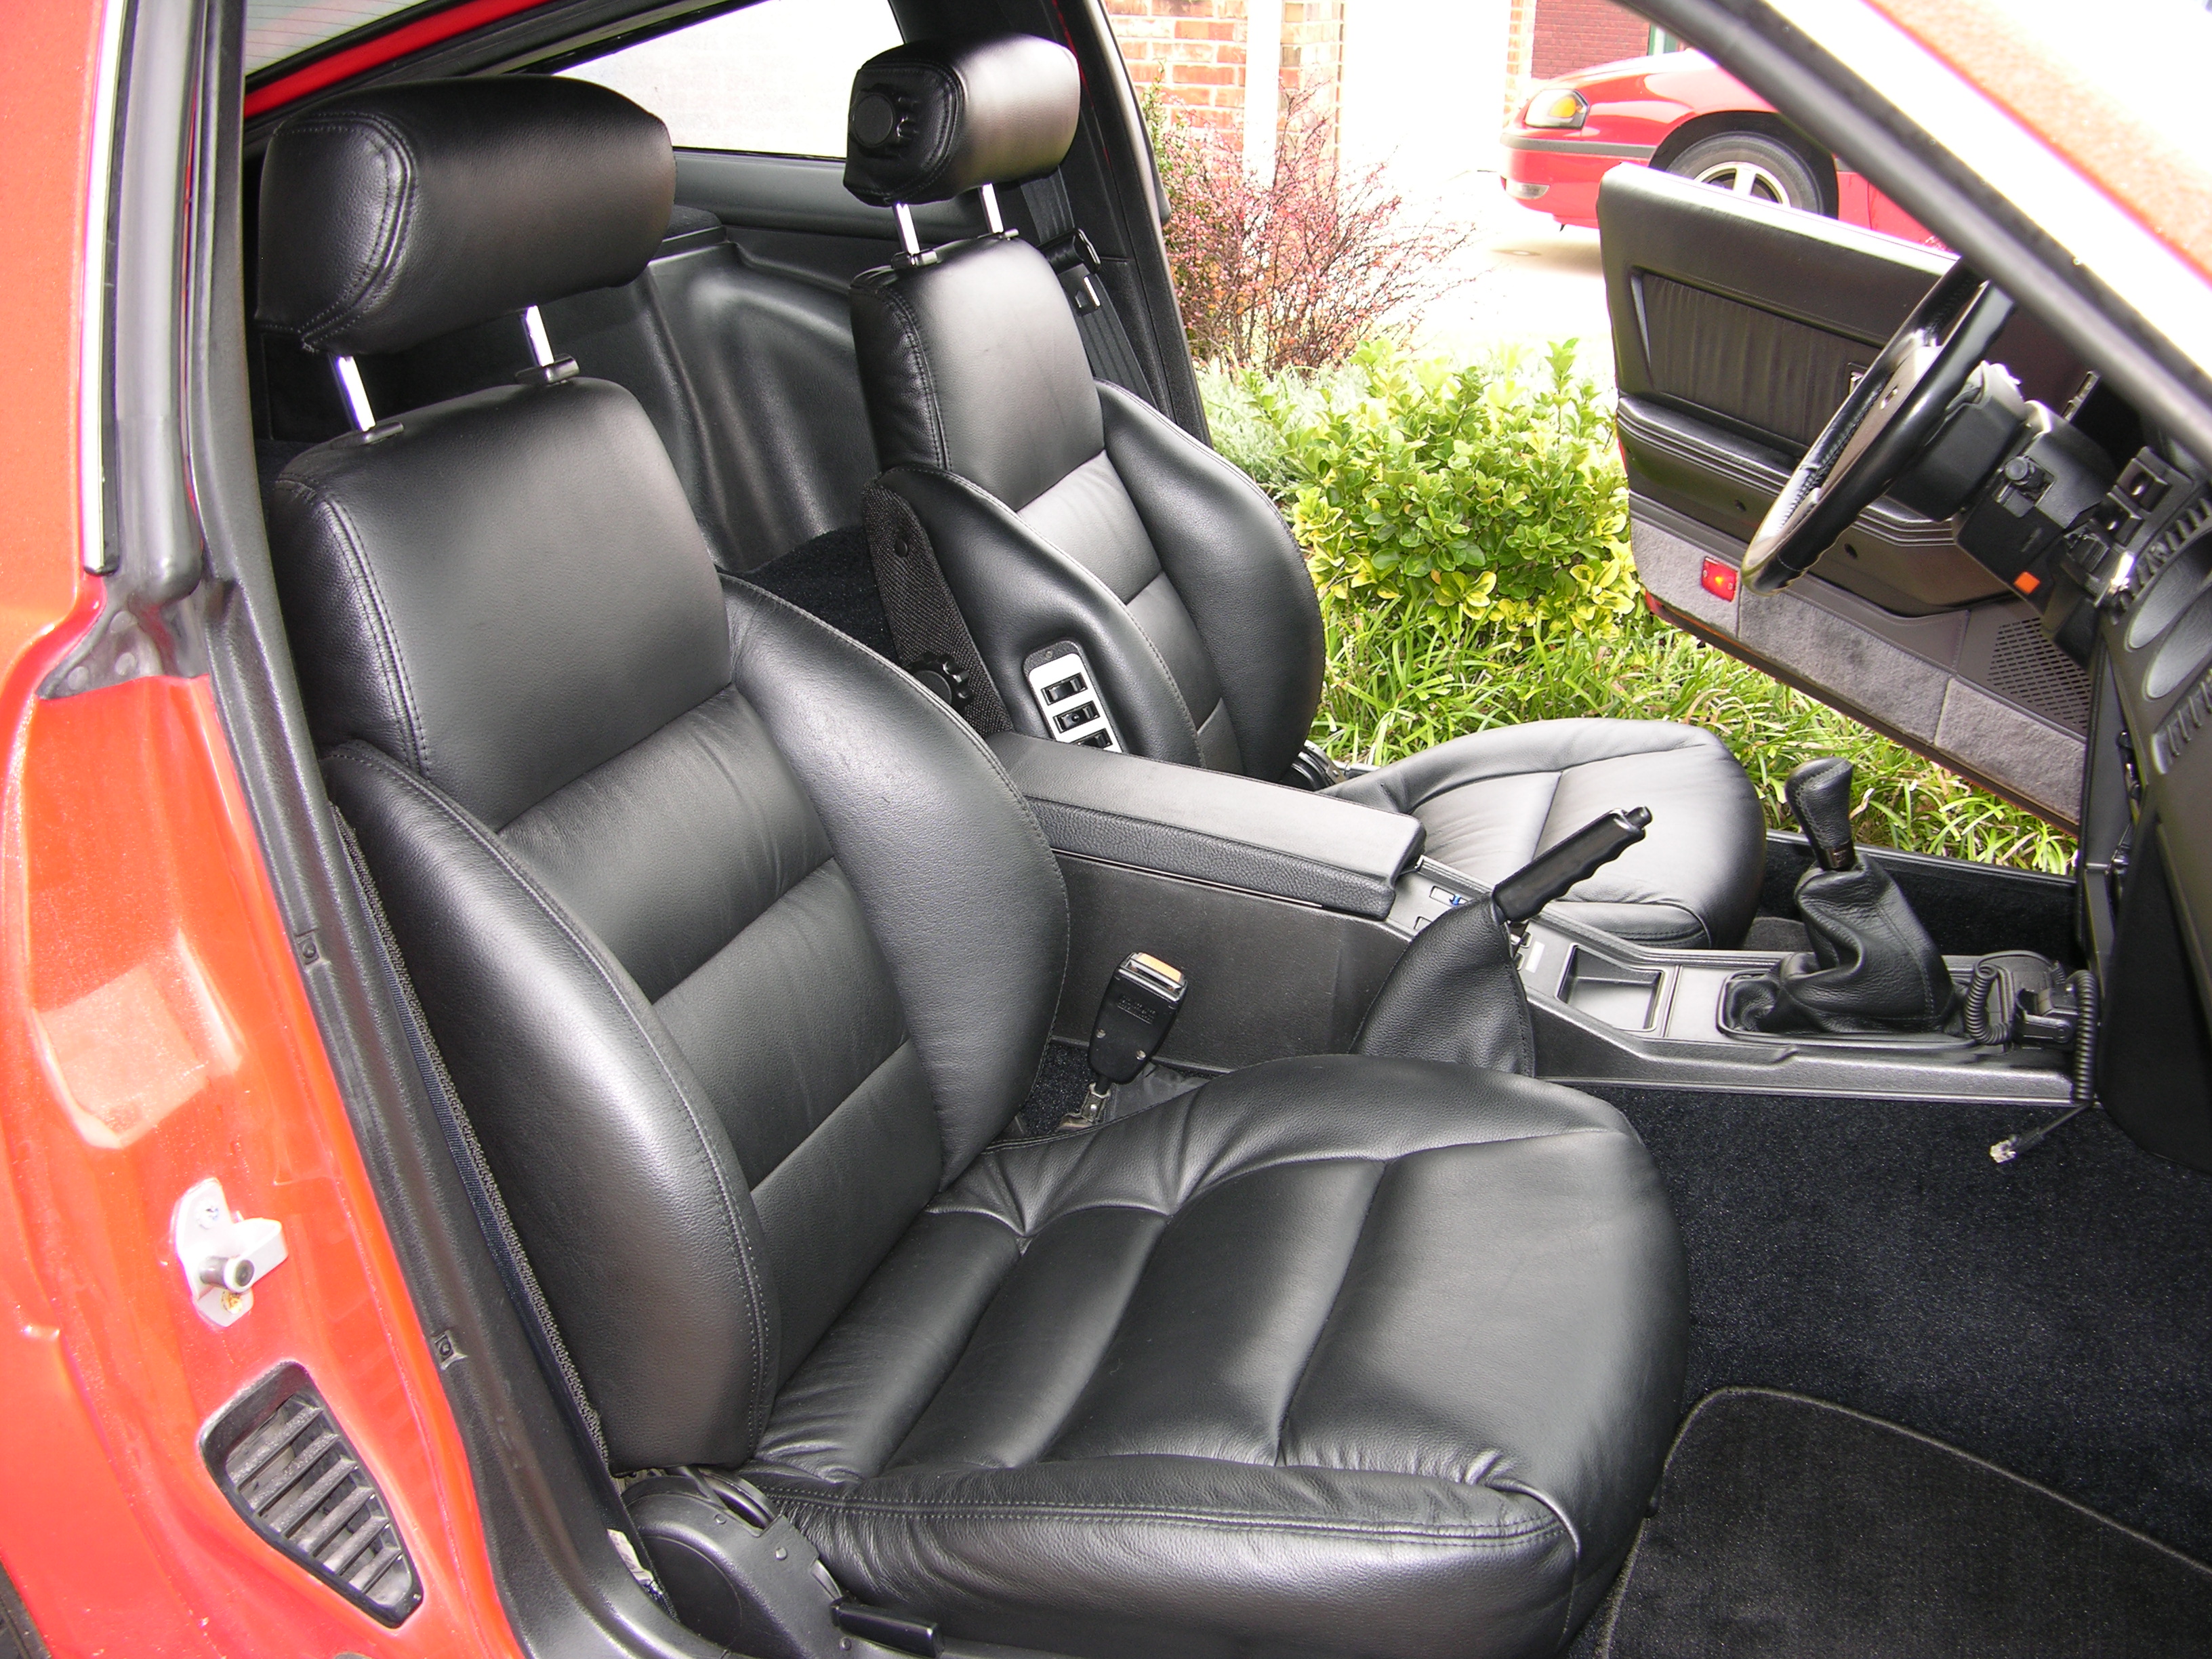 Nissan 300zx leather seat covers #2